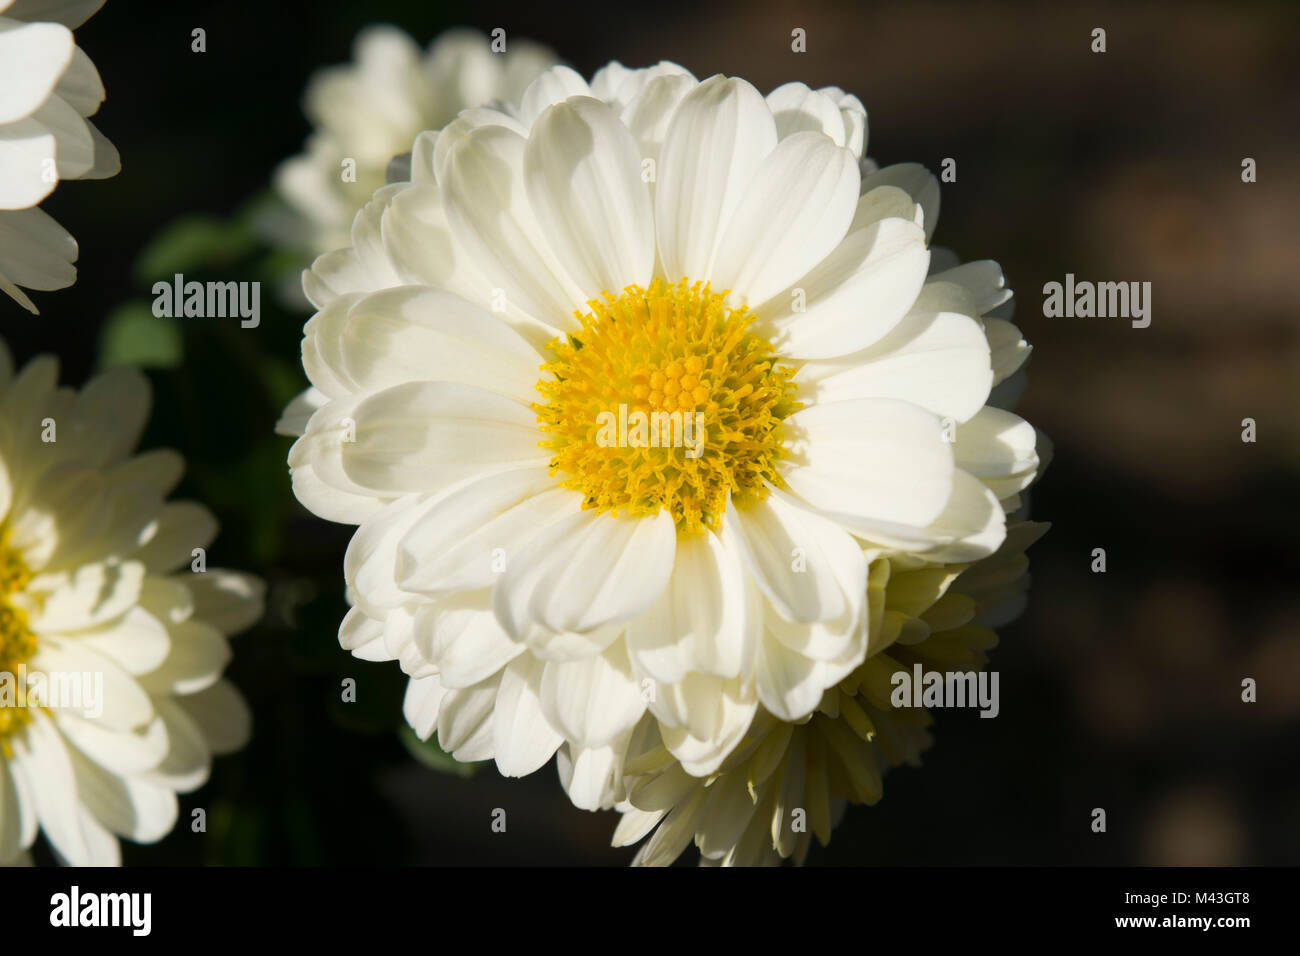 Flowers in the garden in autumn: a beautiful white and sunshine yellow chrysanthemums flower head. Stock Photo